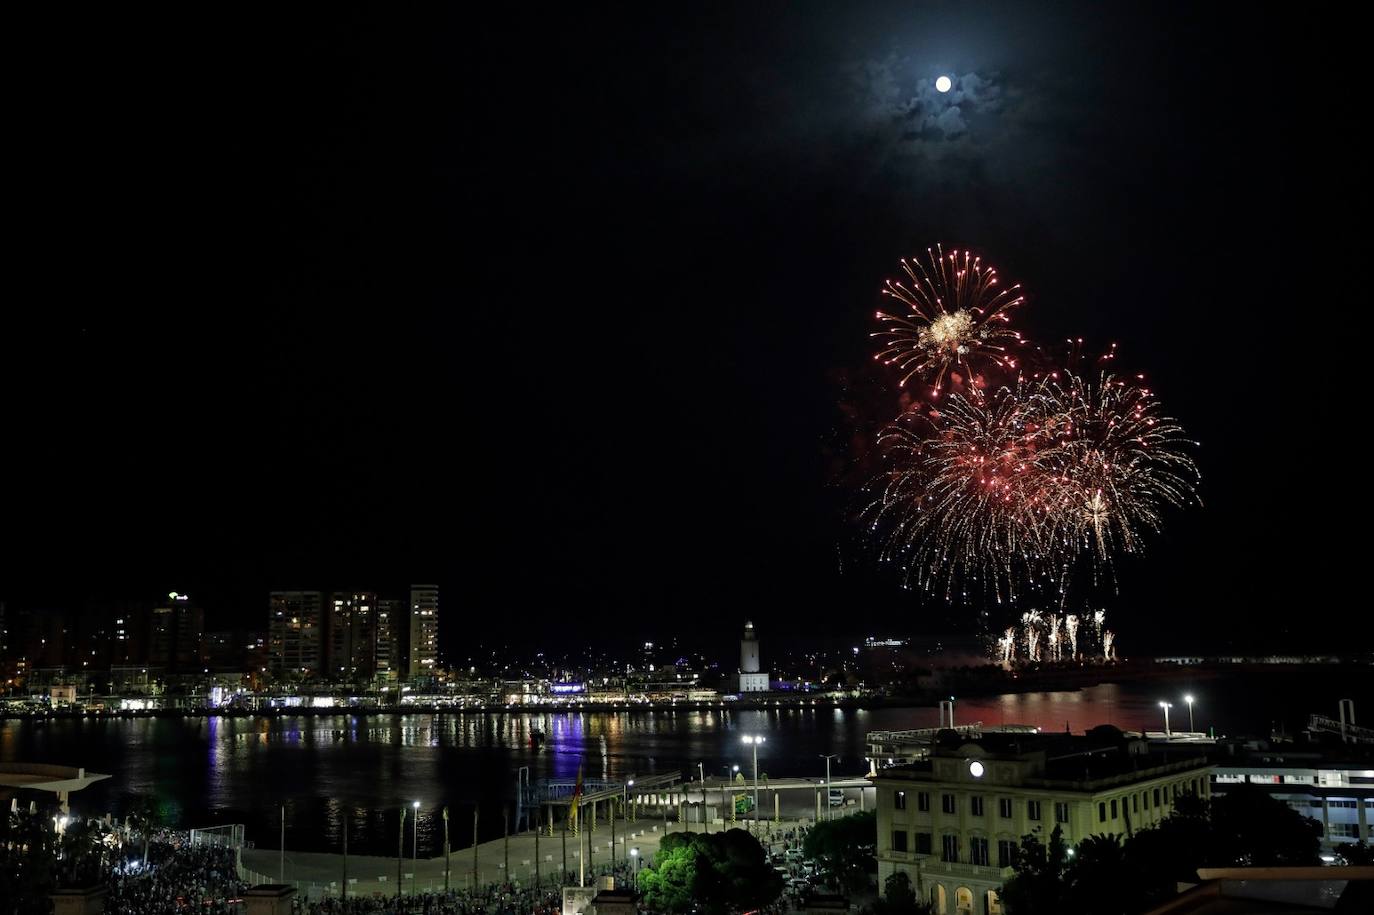 Spectacular drone and firework shows light up the sky to mark the start of Malaga Feria